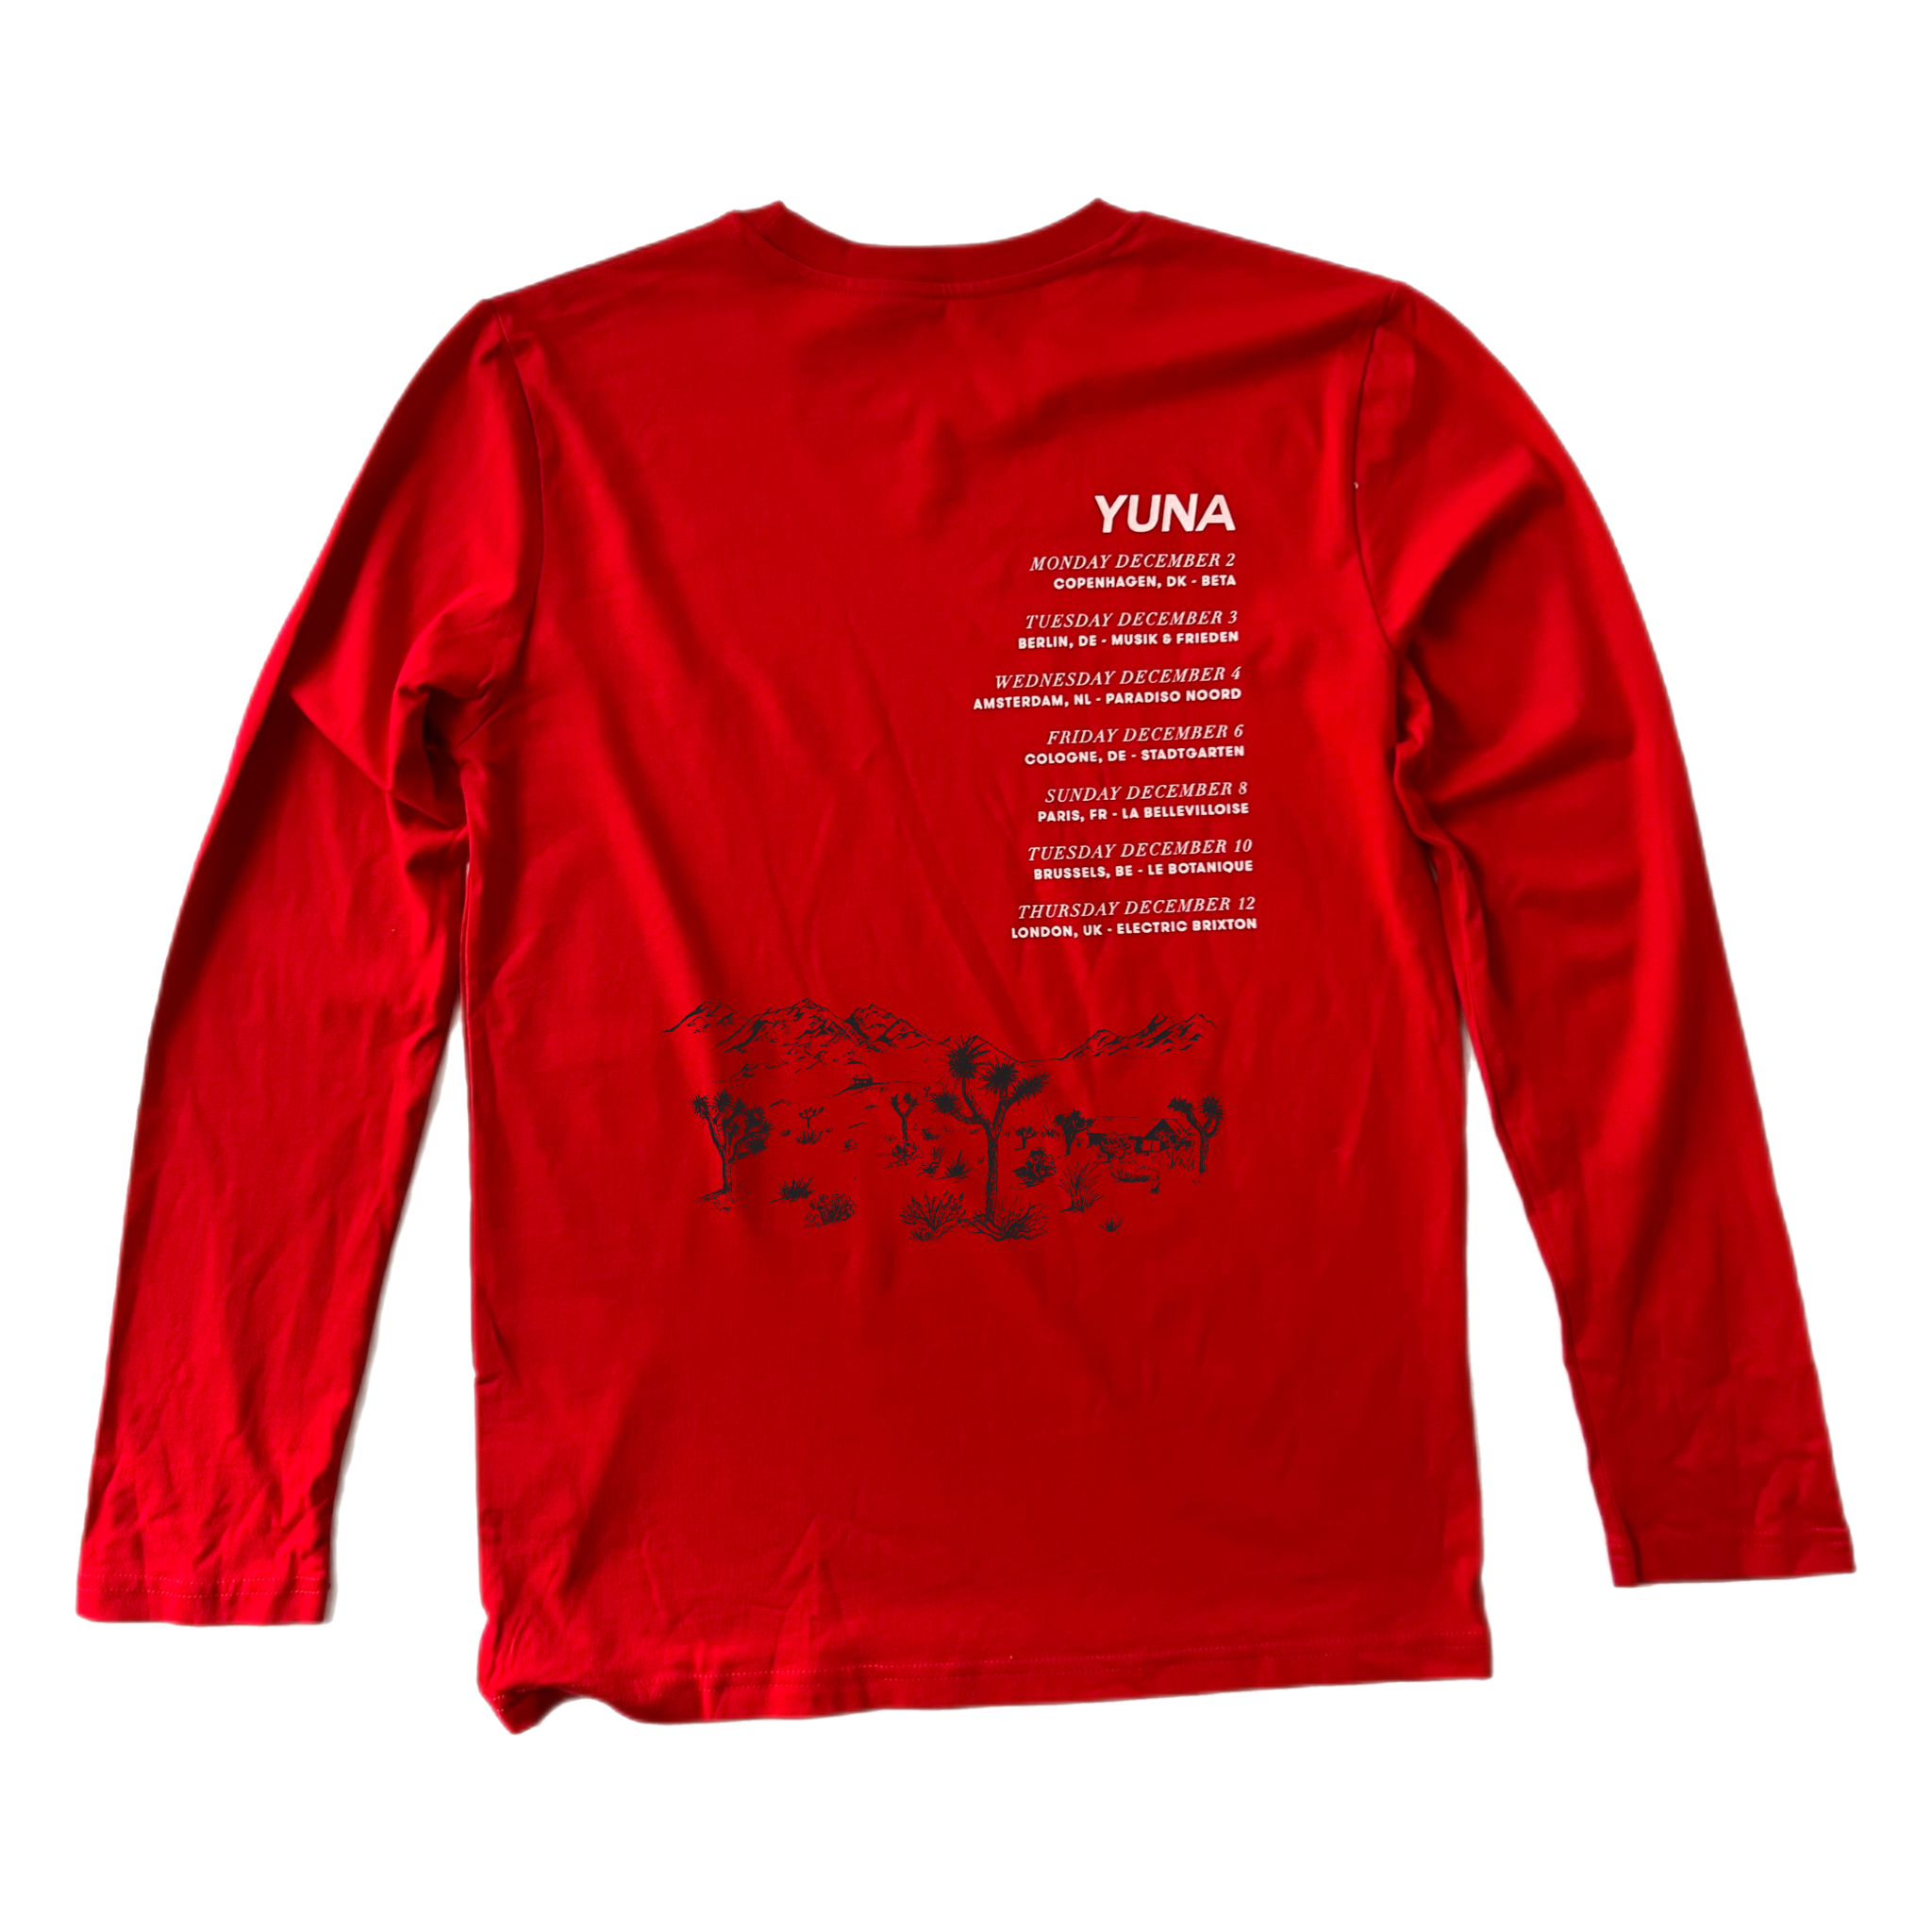 Reworked 2019 Yuna Rouge European Tour Long Sleeve Tee (LIMITED EDITION)